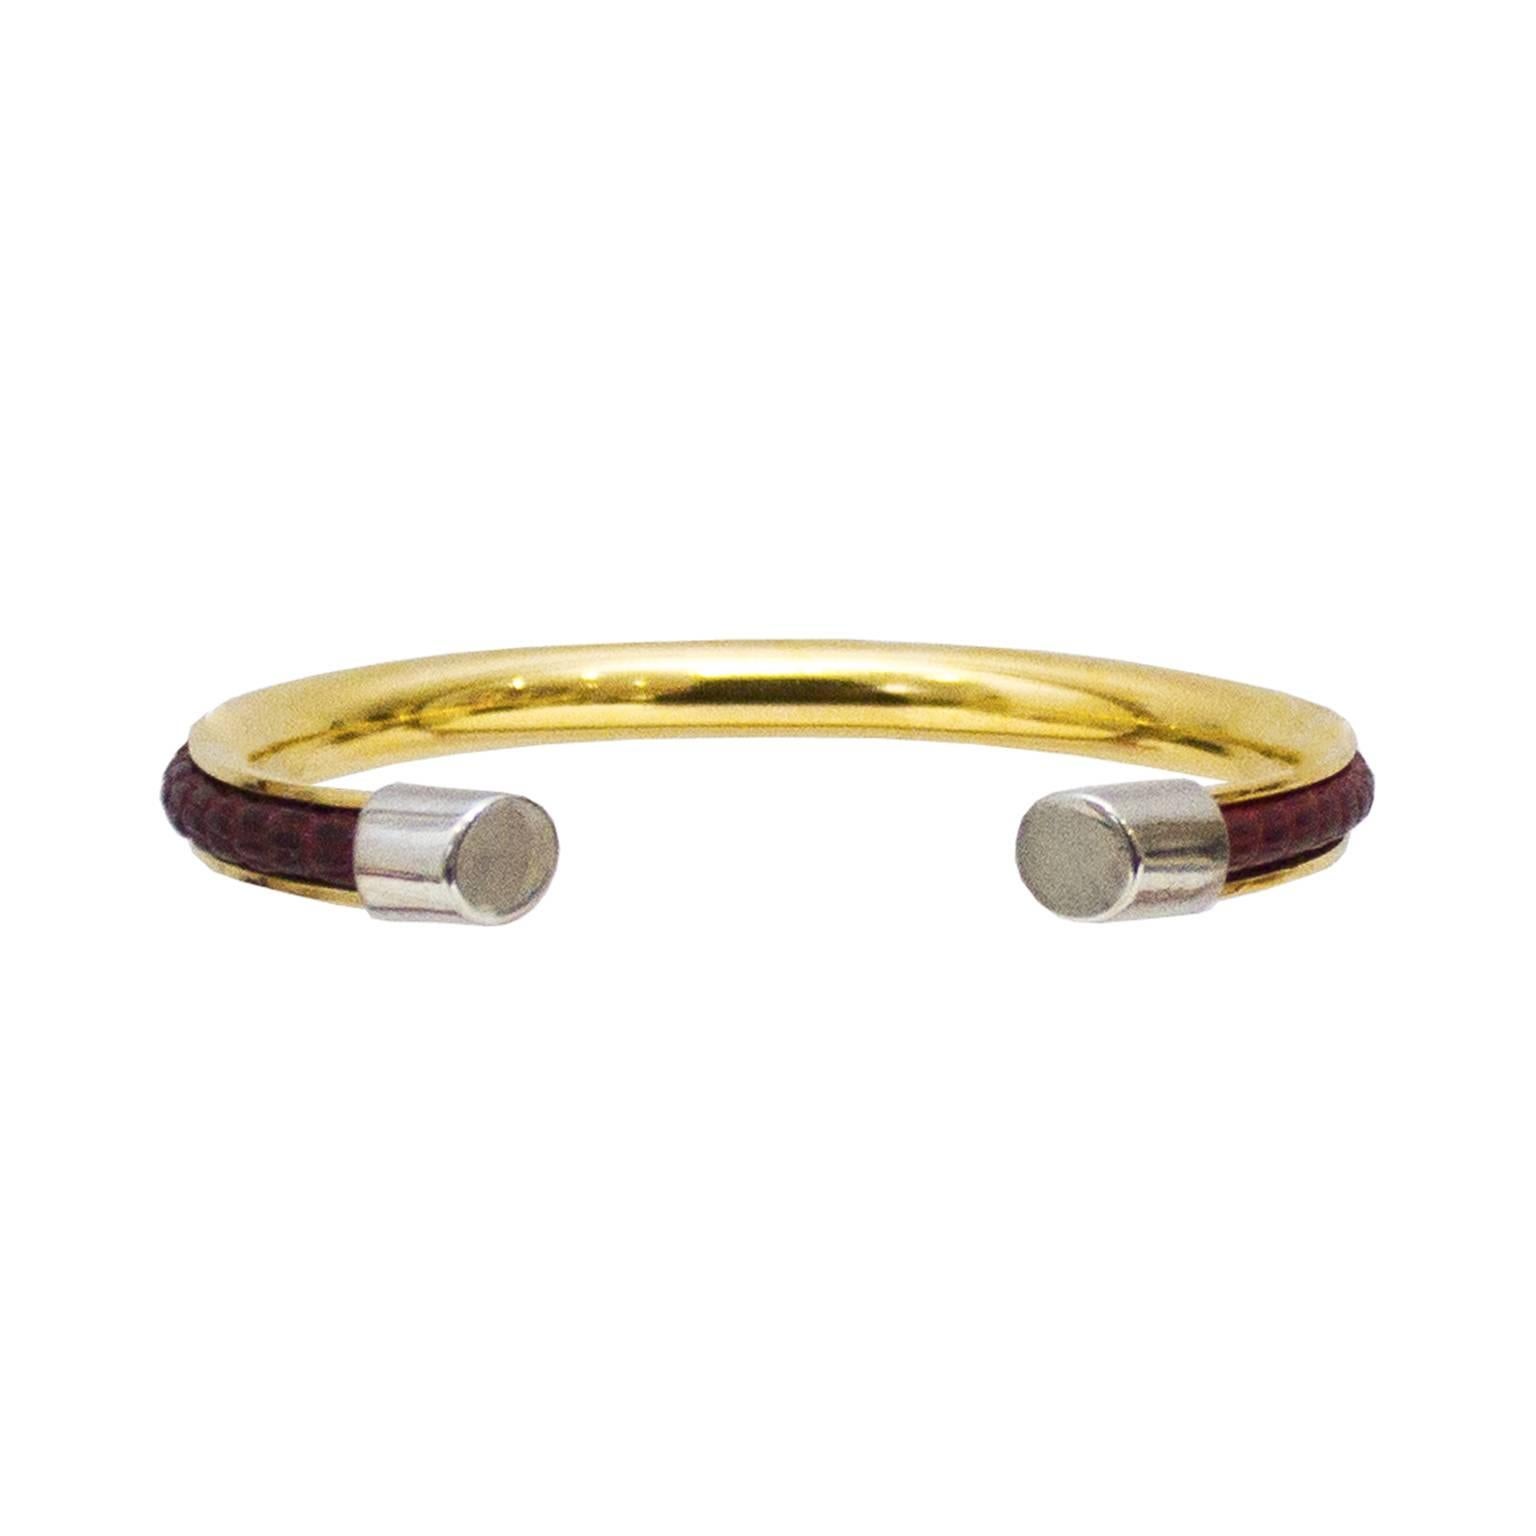 Gucci lizard and gold hardware rigid bracelet from the 1970’s. The burgundy lizard skin is set in a gold tone frame with a Gucci logo engraved in the front and finished with silver tone caps. Stamped “Gucci Made in Italy” on the caps. In excellent